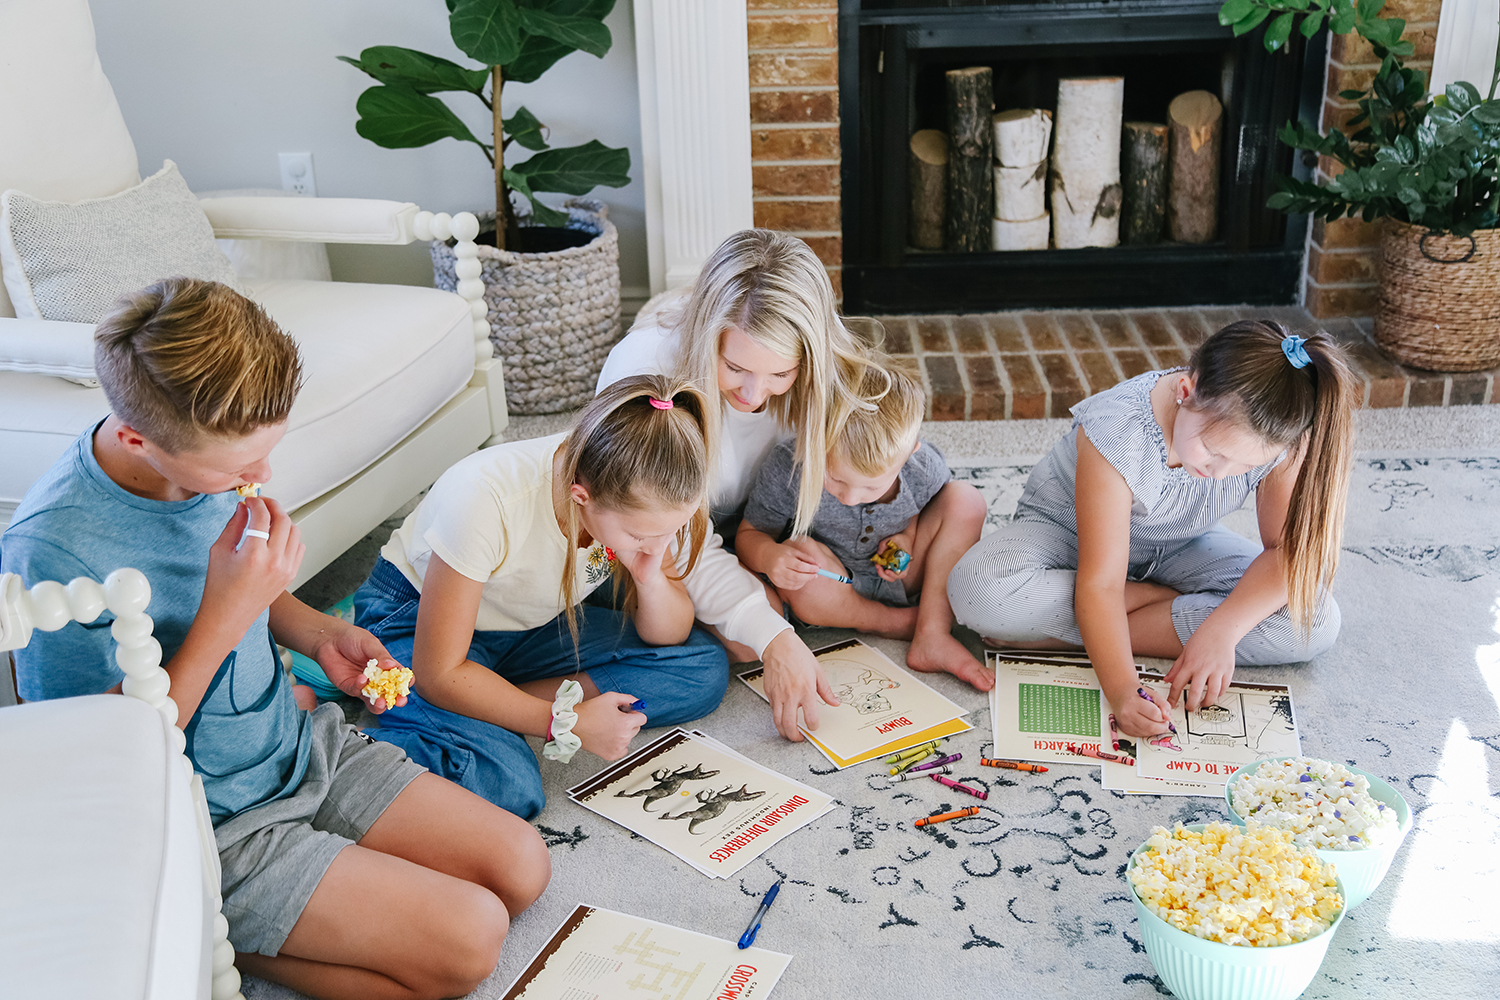 Family Fun Night at Home ideas featured by Utah lifestyle blogger, By Jen Rose